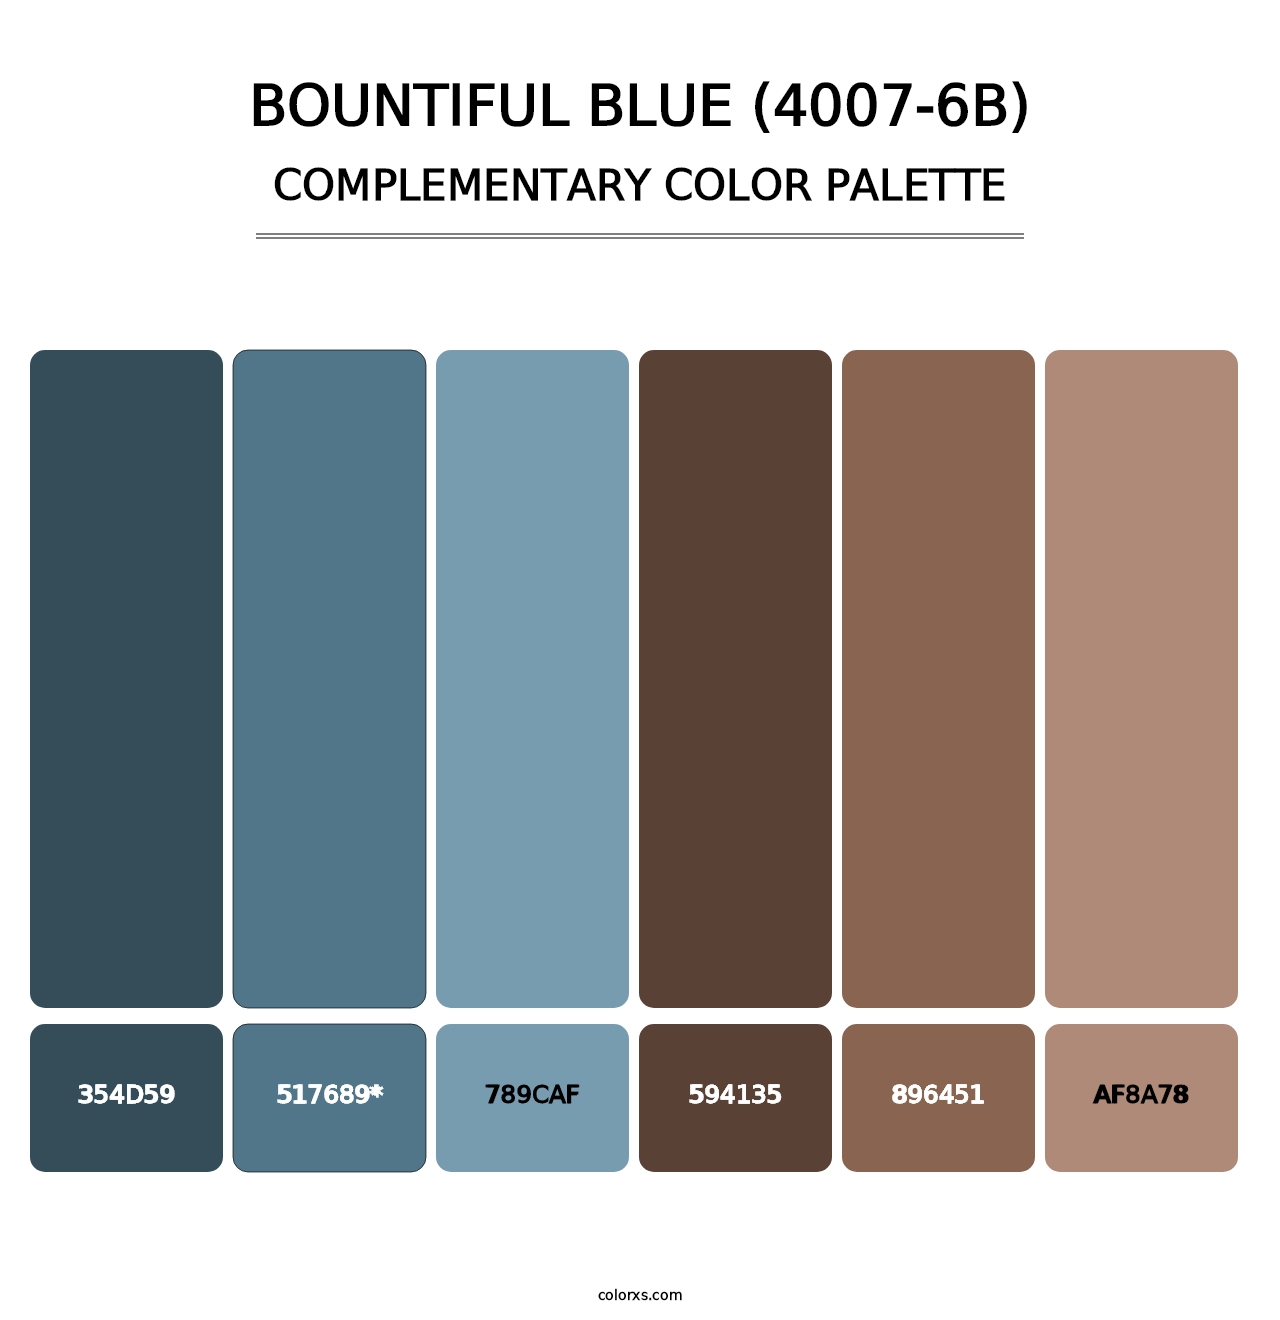 Bountiful Blue (4007-6B) - Complementary Color Palette